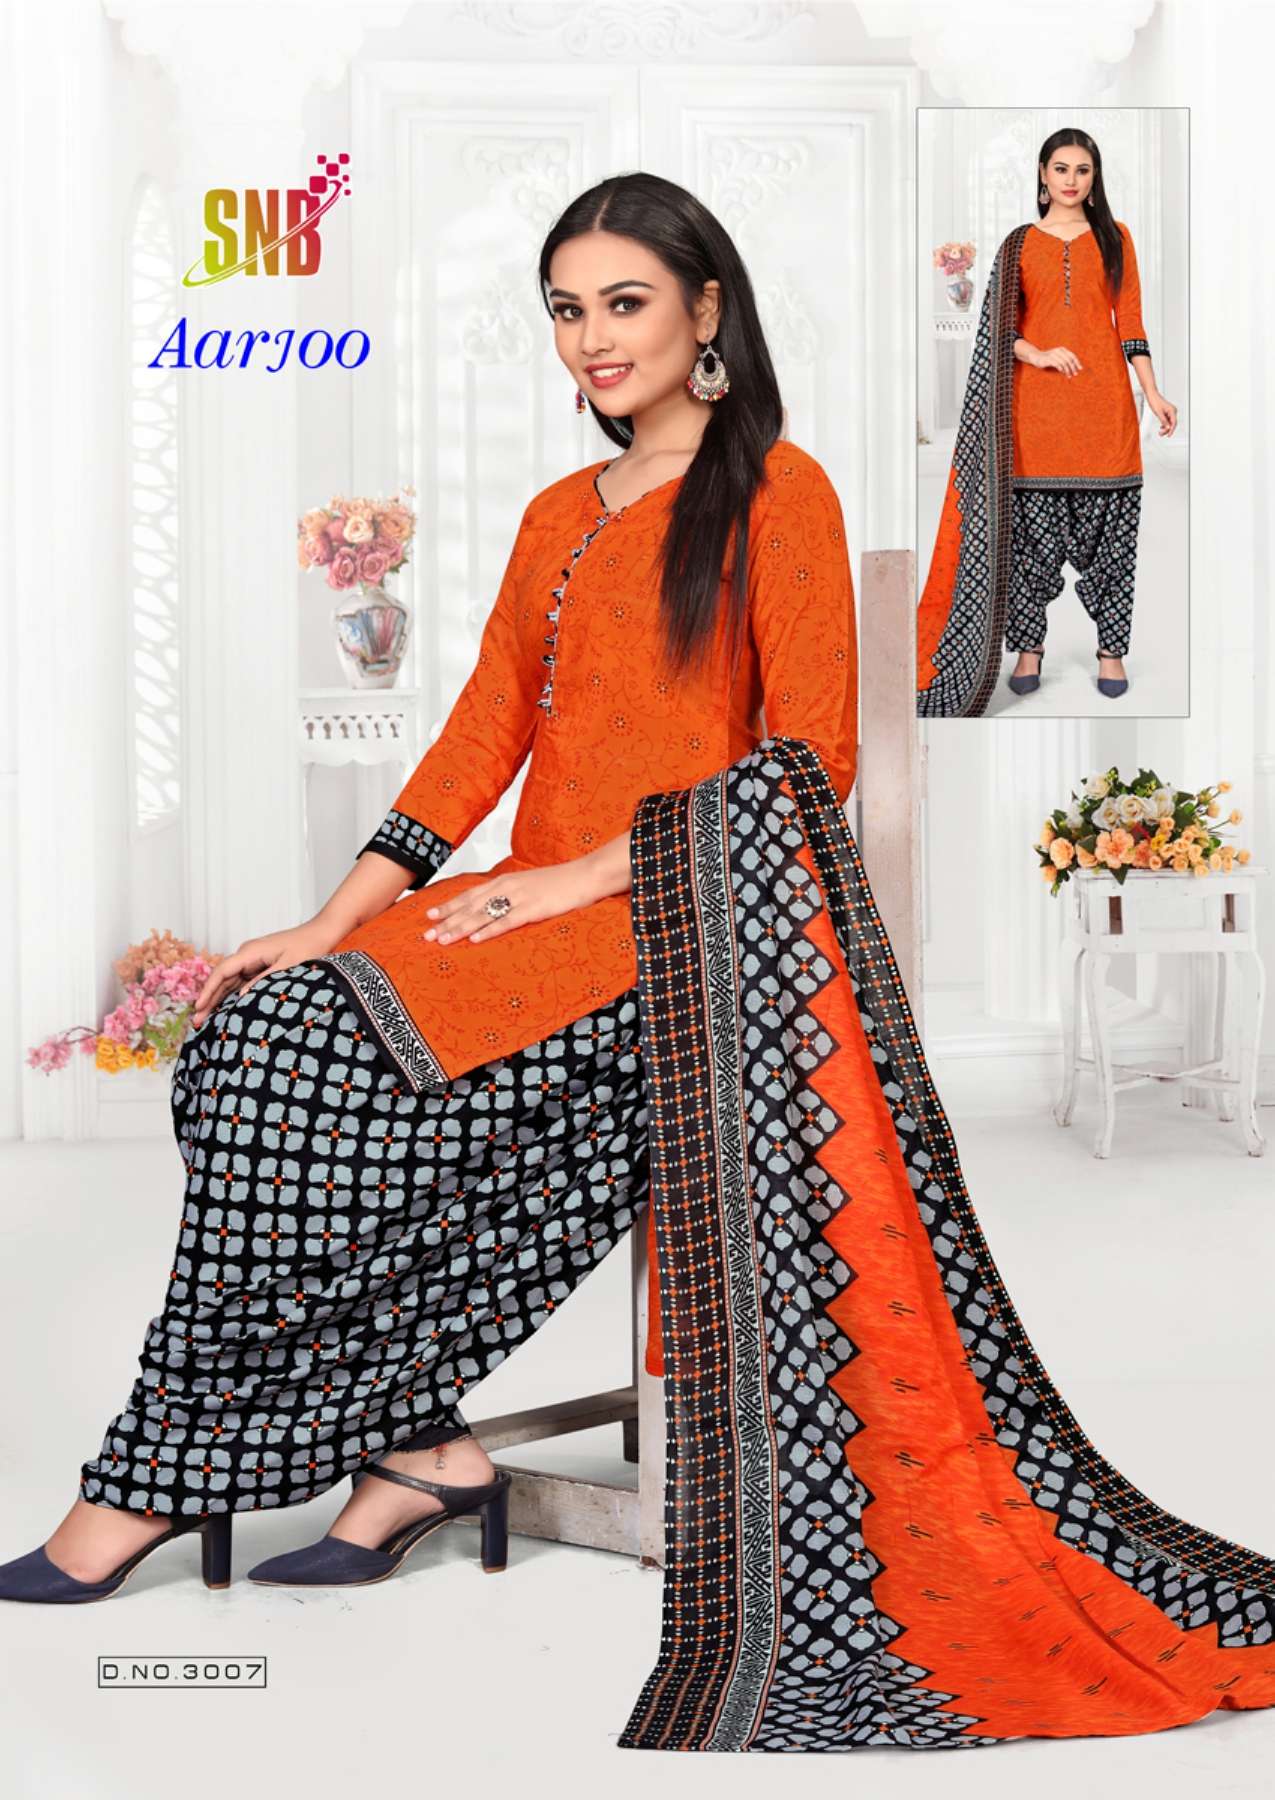 Snb Arjoo Vol-3 Indo Cotton Printed Readymade With Innerre Kurti On Wholesale